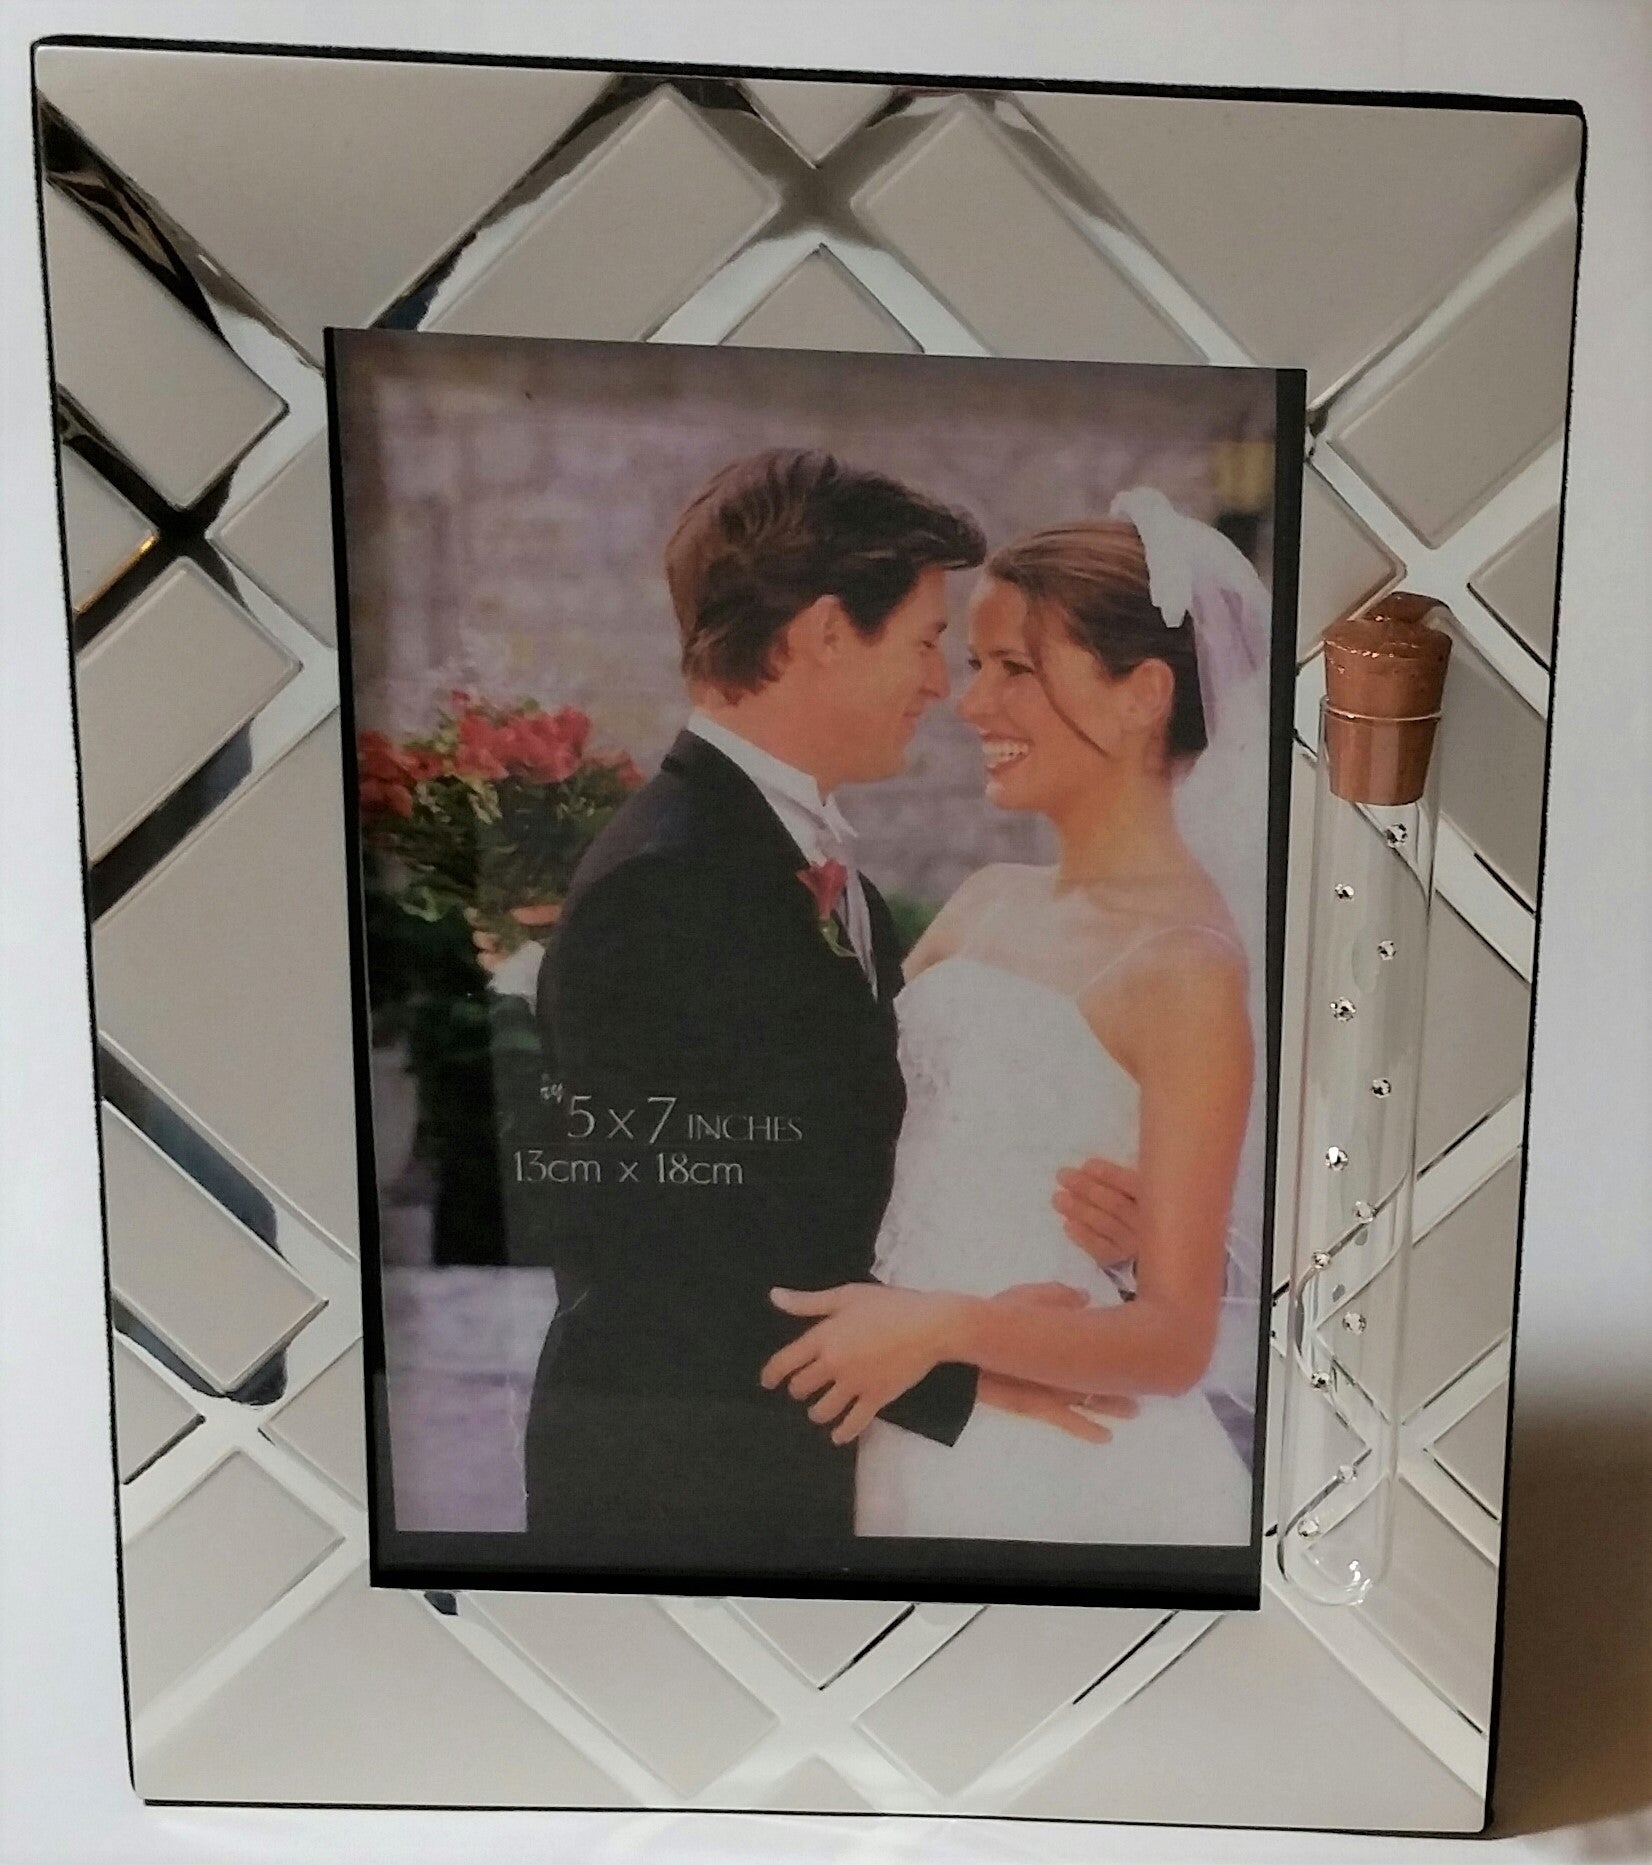 Jewish Wedding Picture Frame - Holds Shards From Wedding Ceremony - Holds 5x7 Picture